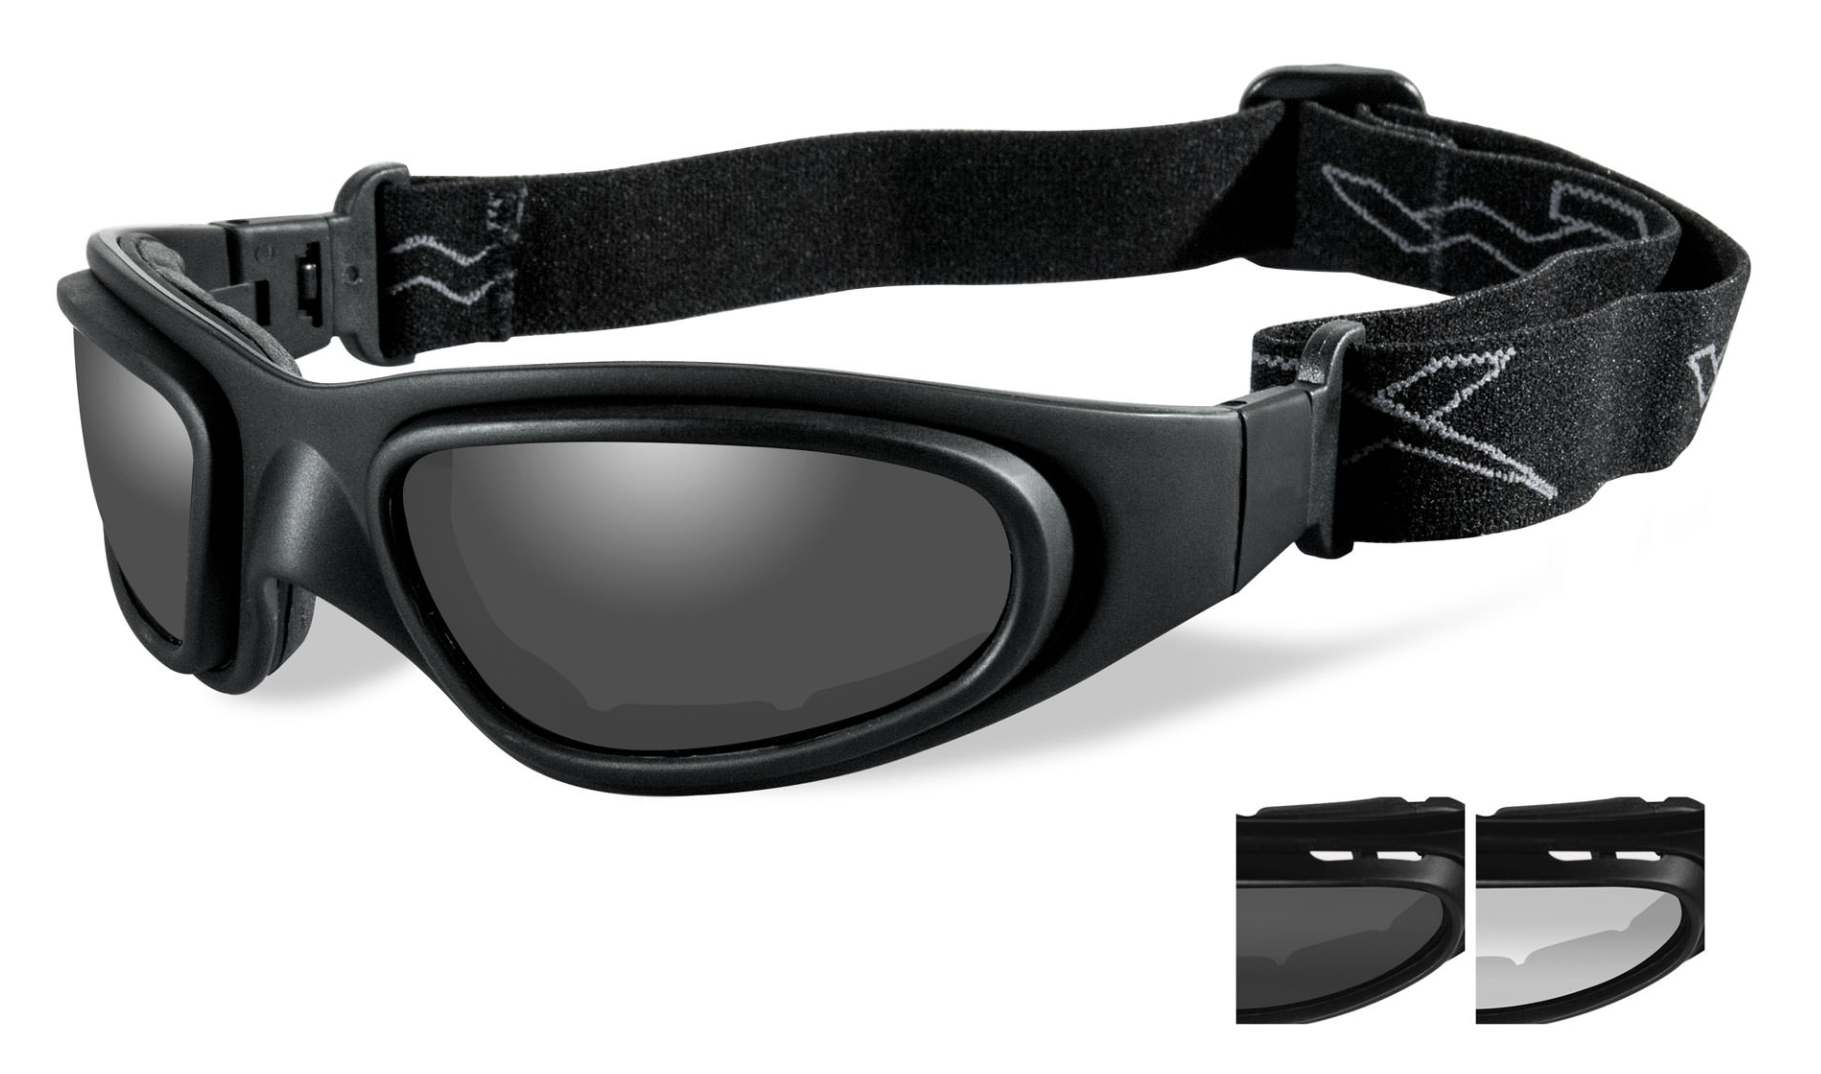 Wiley X motorcycle sunglasses featuring the SG-1 frames. Matte black with black strap and dark grey lenses.